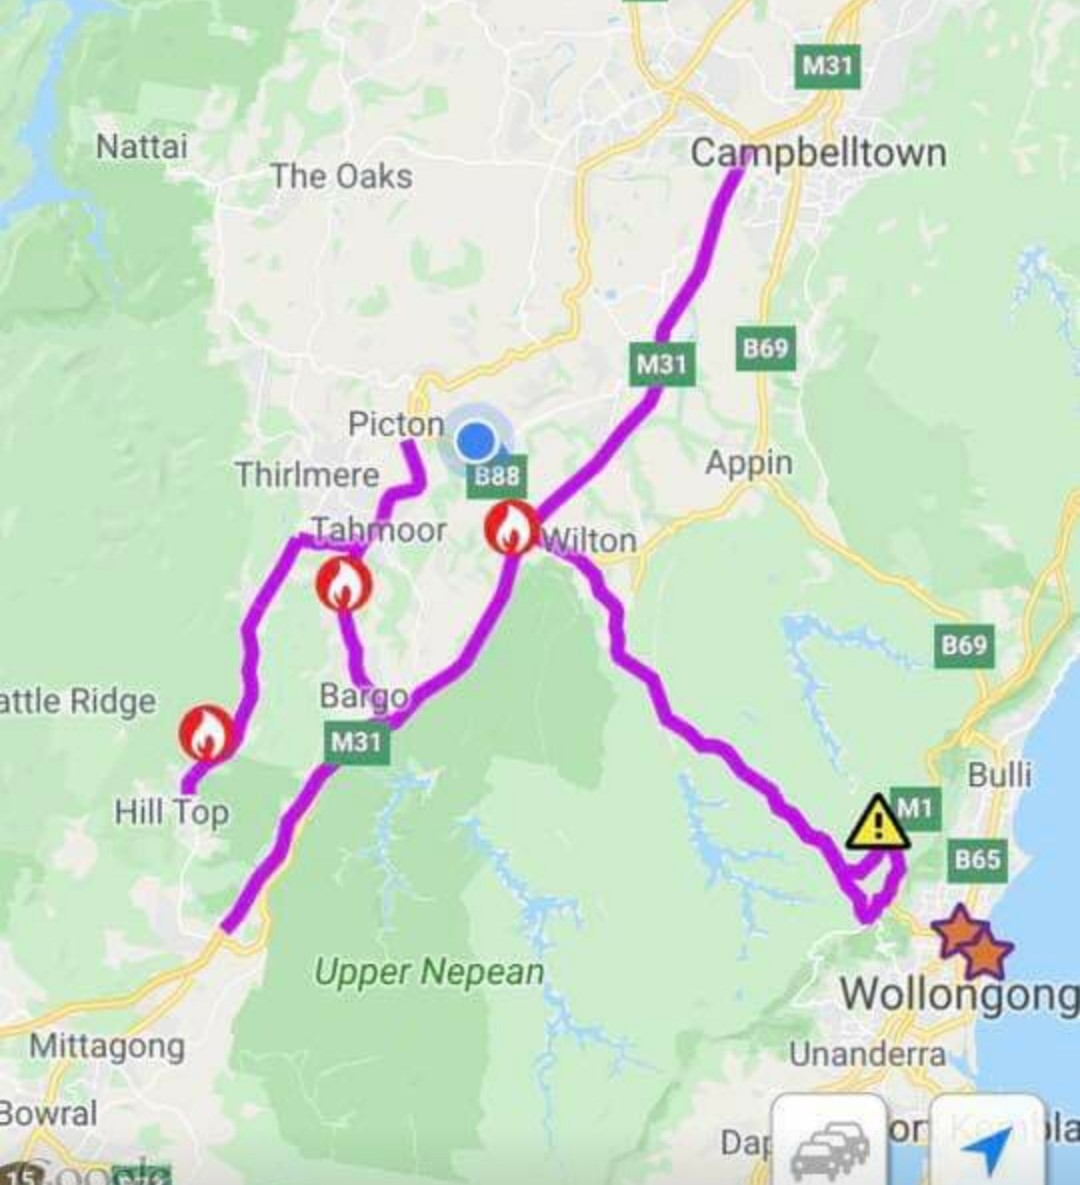 A map showing road closures south of Sydney on December 19.